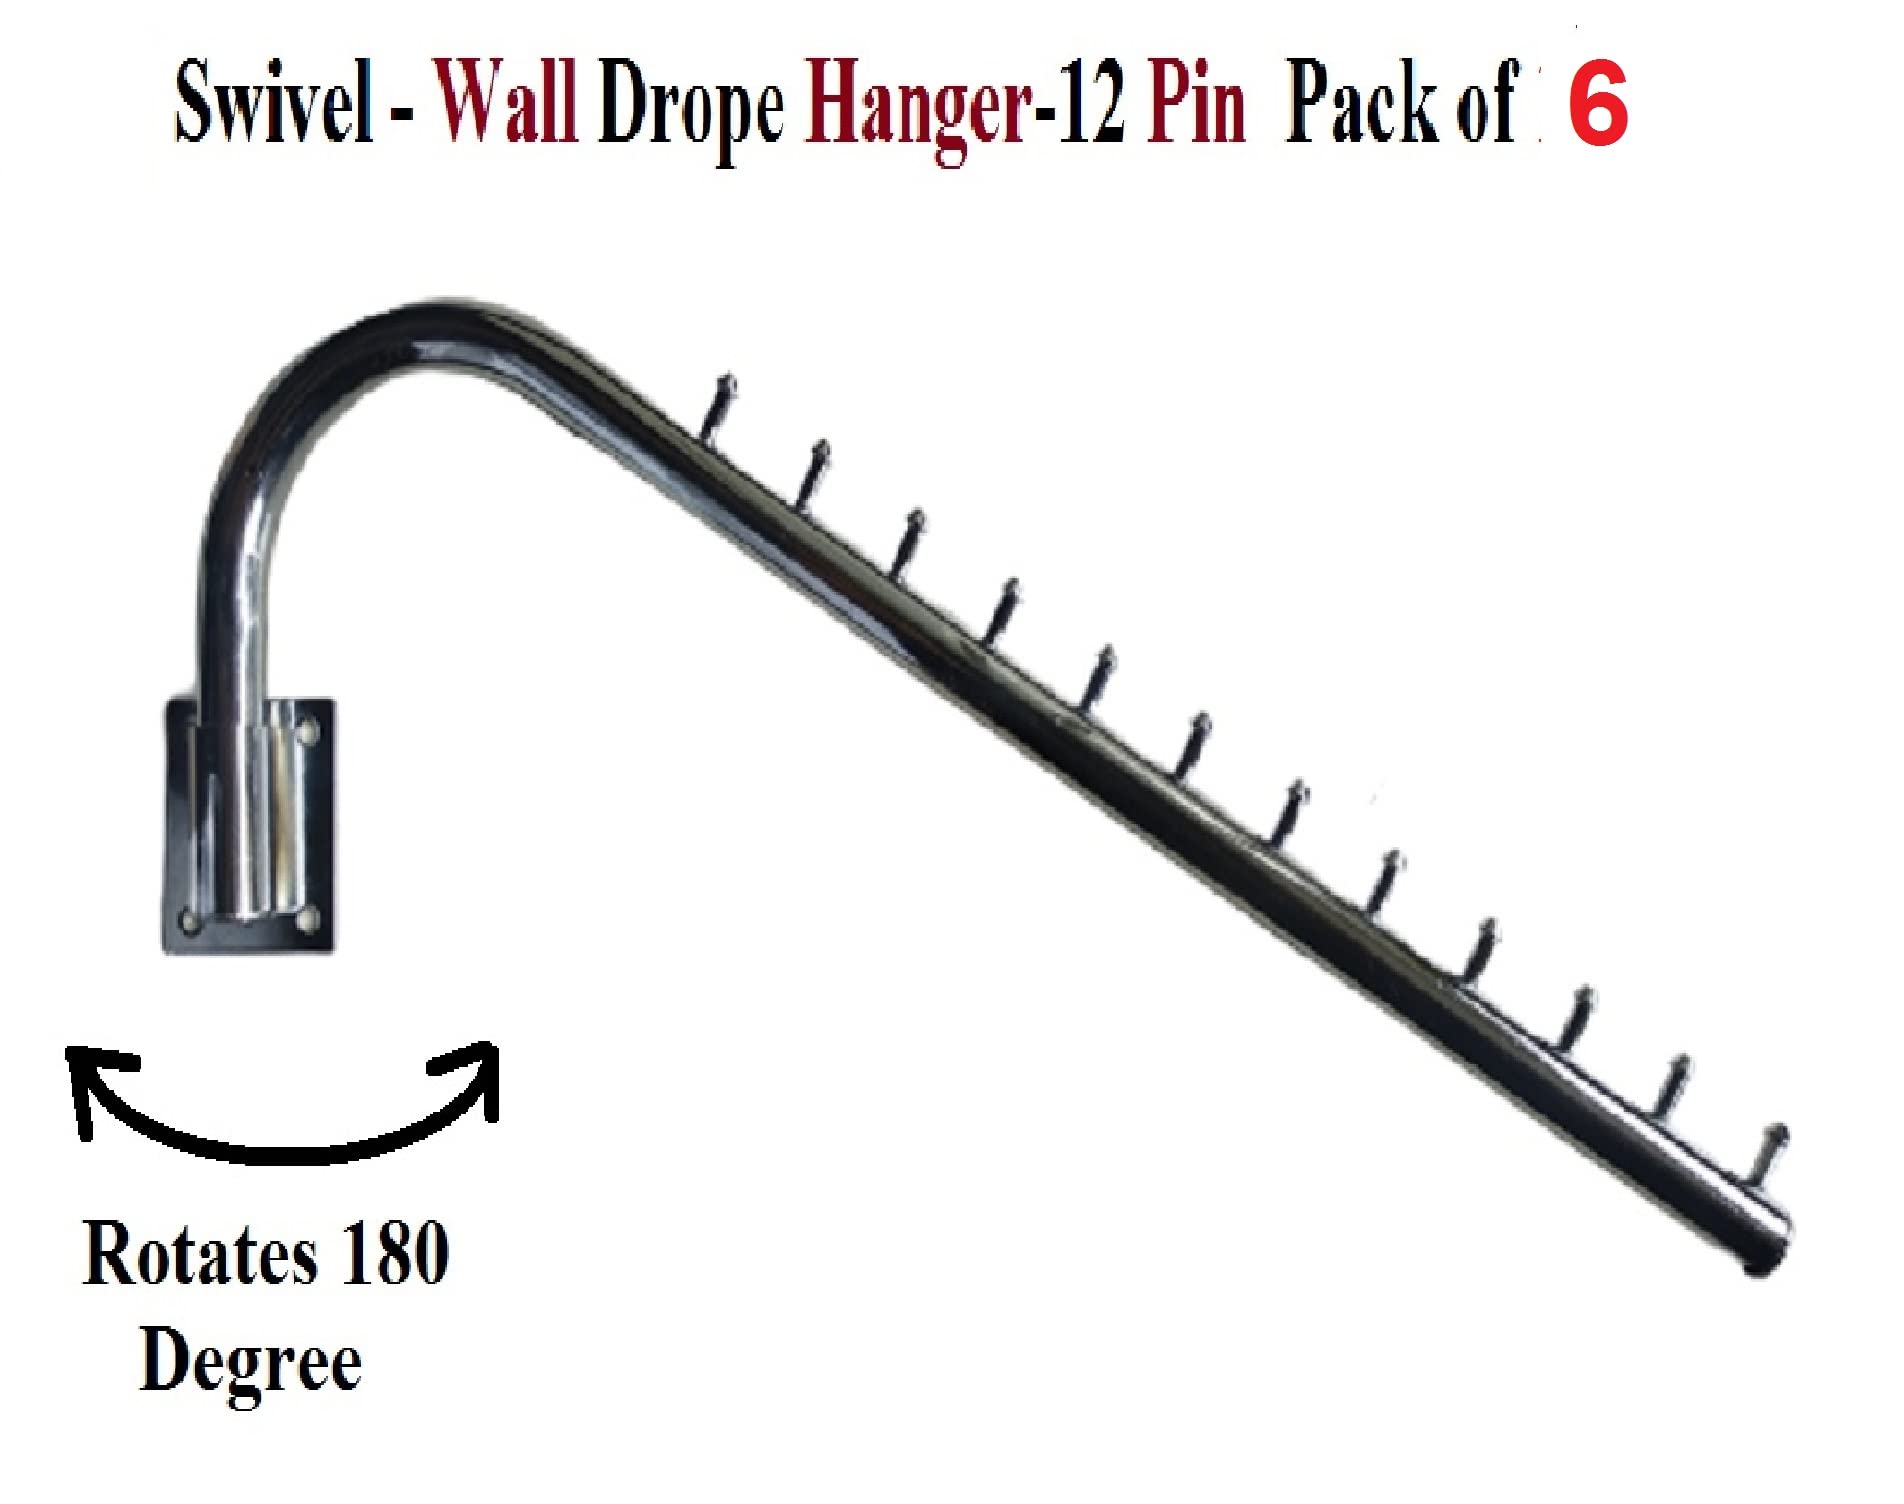 Buy Q1 Beads Stainless Steel 7 Ball Pin Wall Drope Display Hook